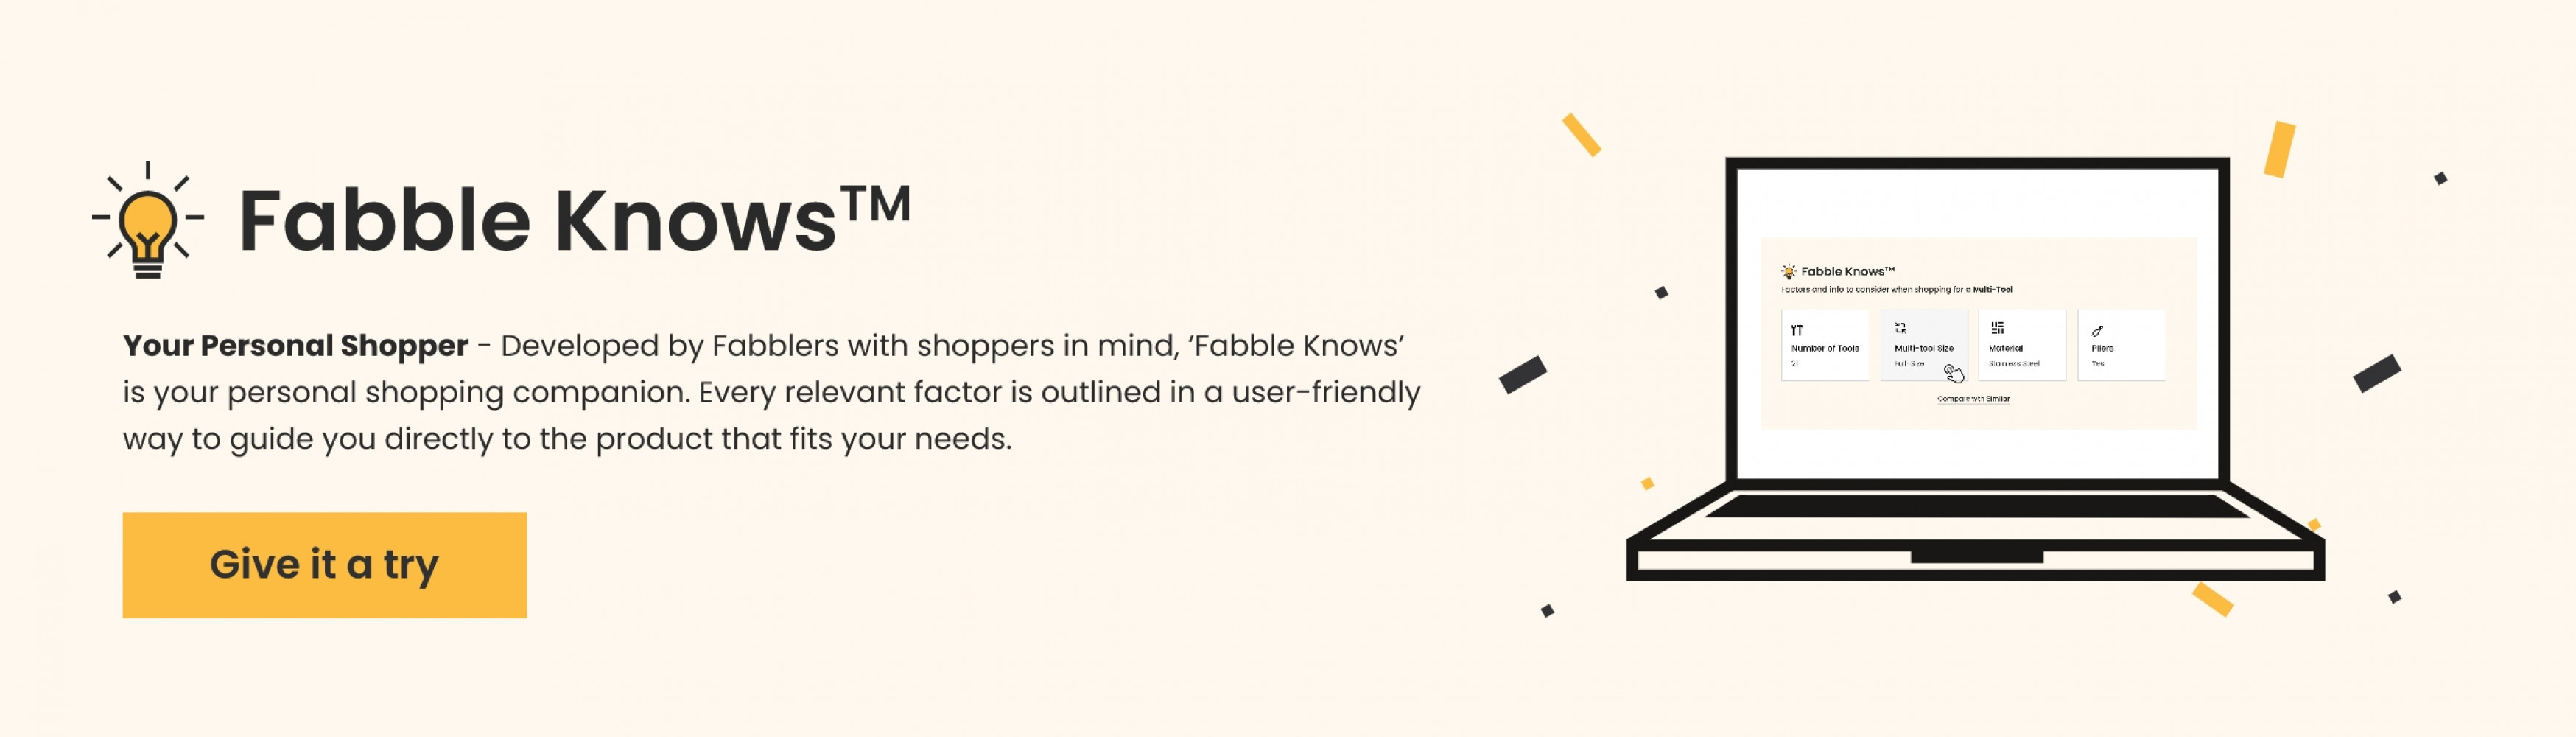 Fabble Knows is your personal shopper - Developed by Fabblers with shoppers in mind, Fabble Knows' is your persoal shopping companion. Every relevent factor is outlined in a user-friendly way to guide you directly to the product that fits your needs.